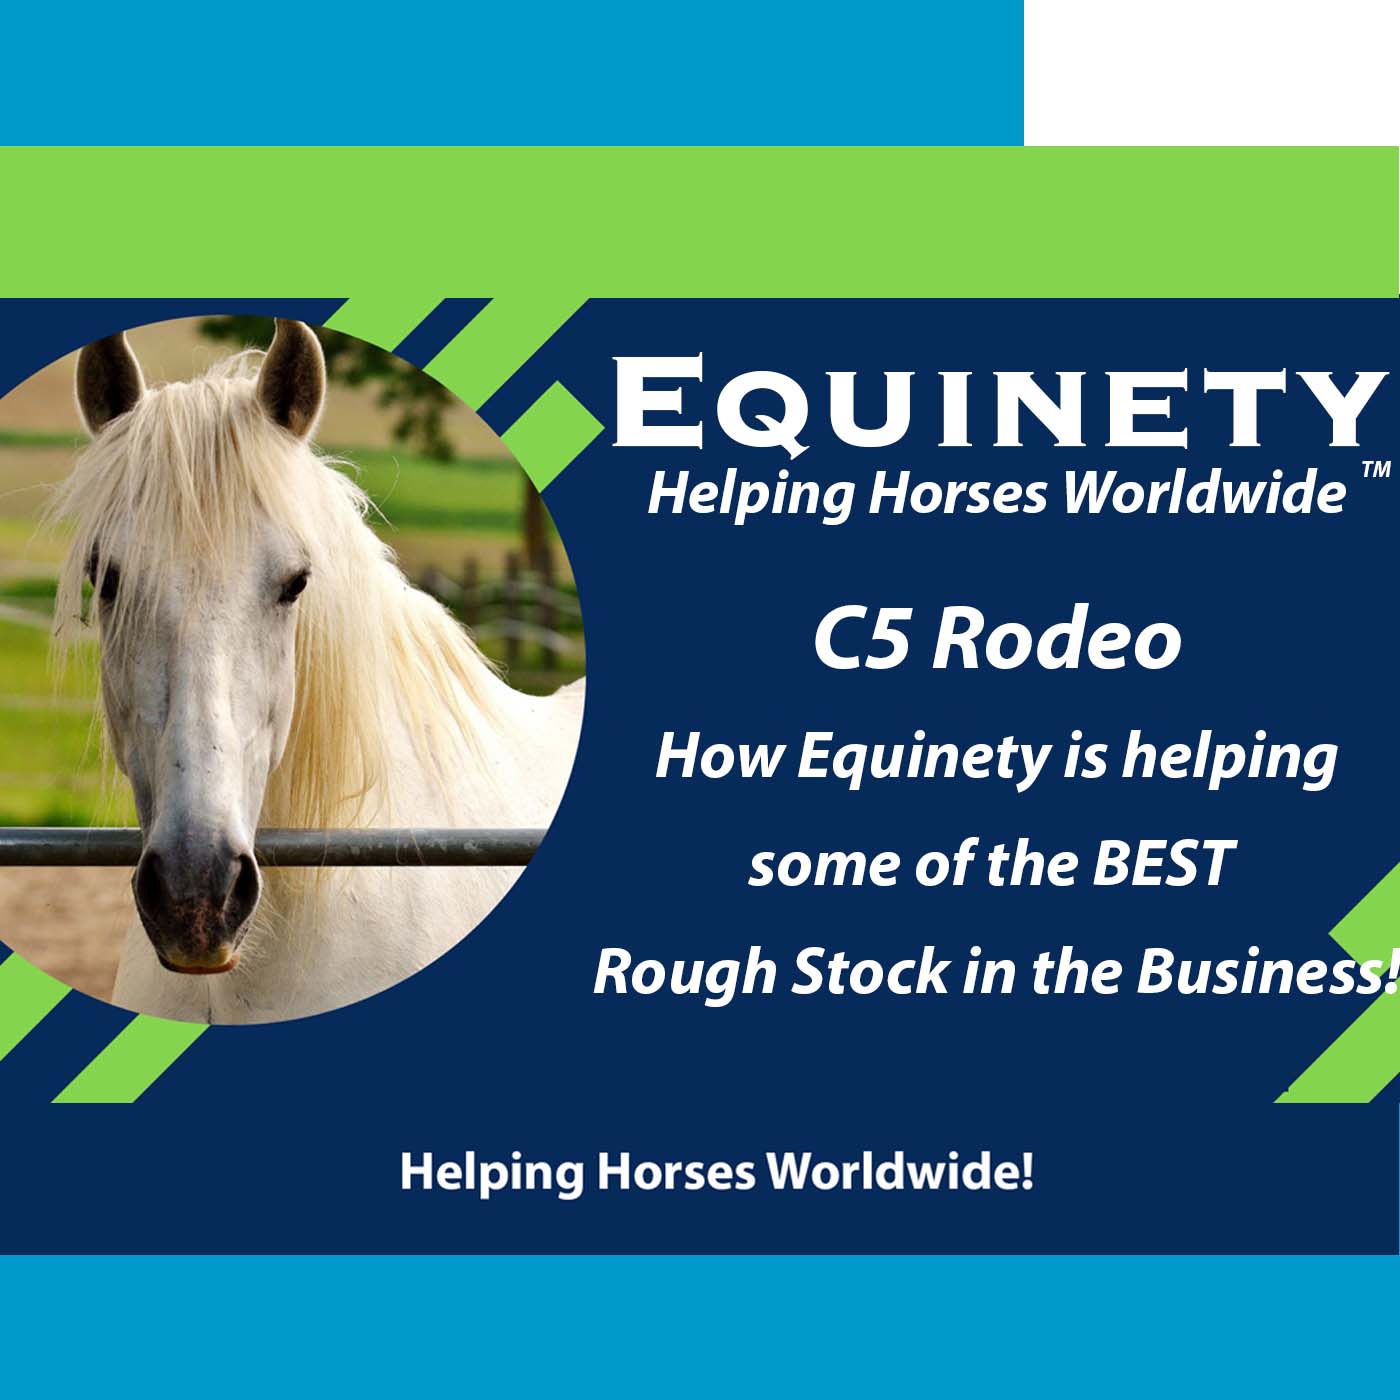 C5 Rodeo - Rough Stock - The BEST in the Business!